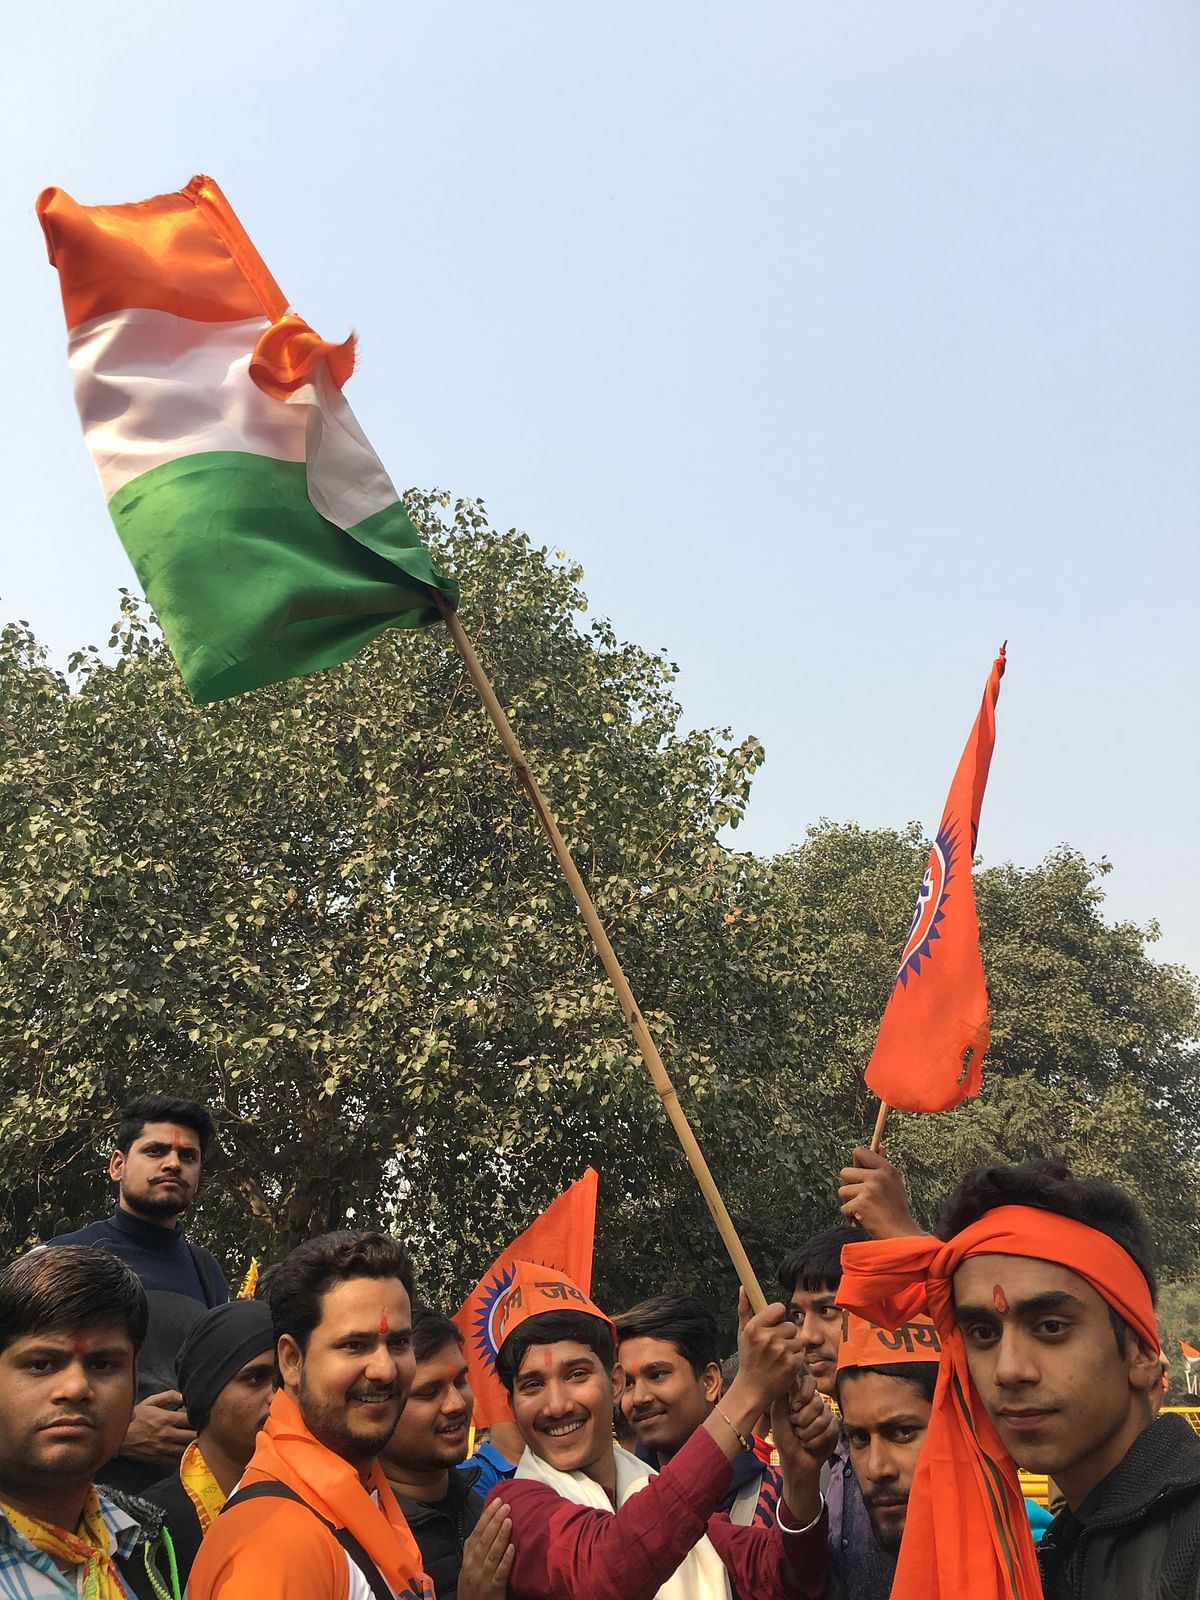 Supporters at VHP rally claimed, “building Ram temple in Ayodhya would resolve agrarian crisis and empower women”.